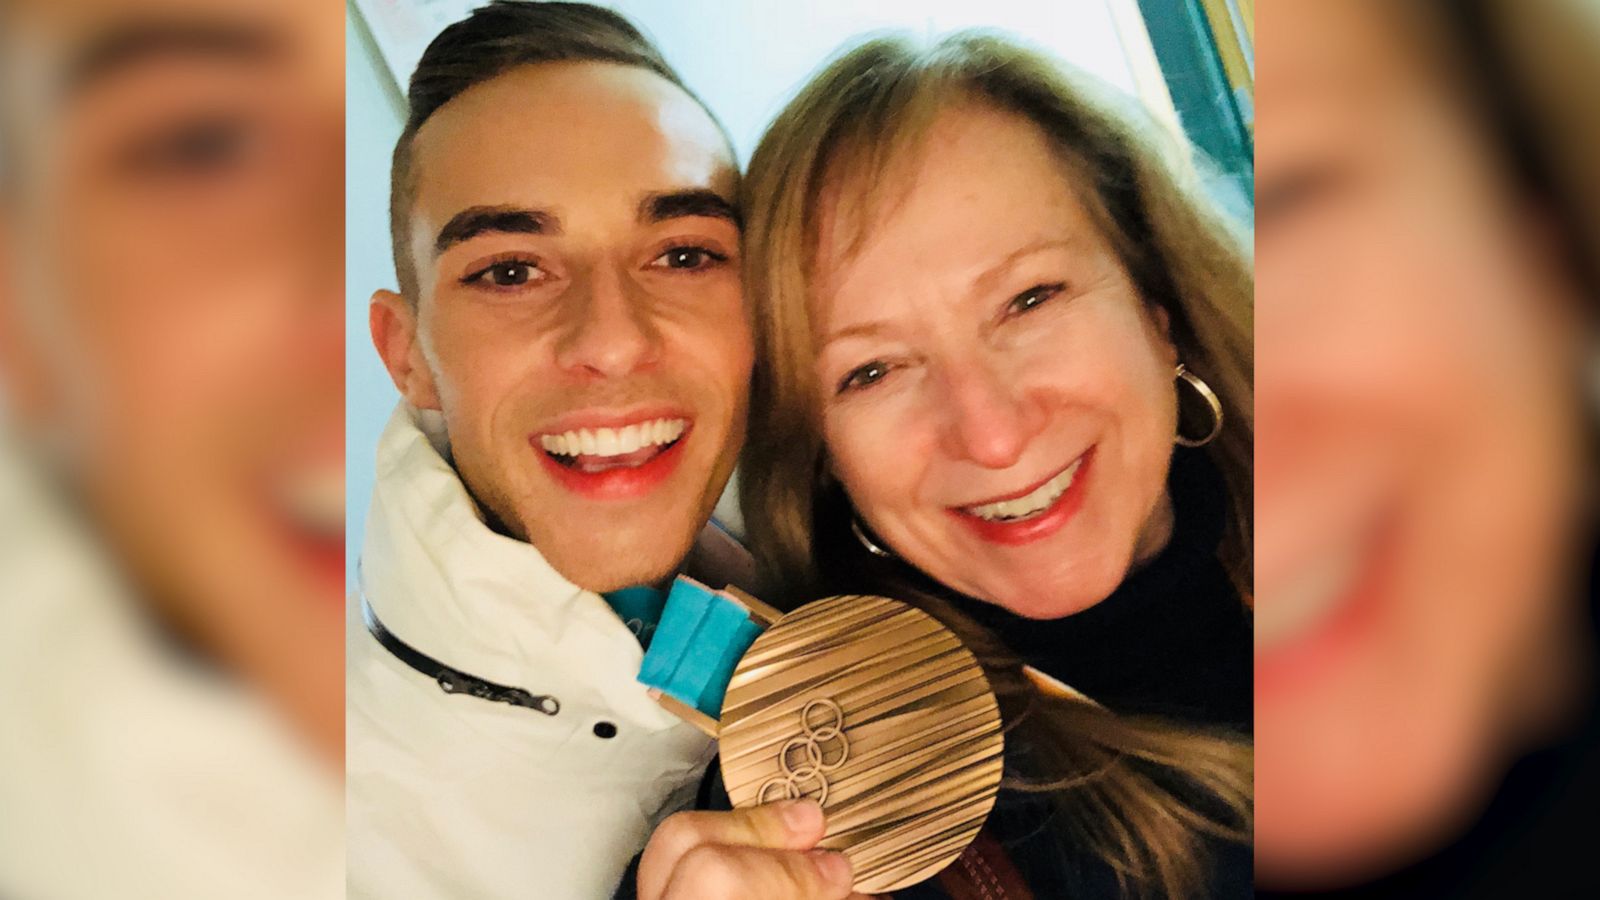 VIDEO: Adam Rippon’s mom celebrates National Coming Out Day with a special letter to